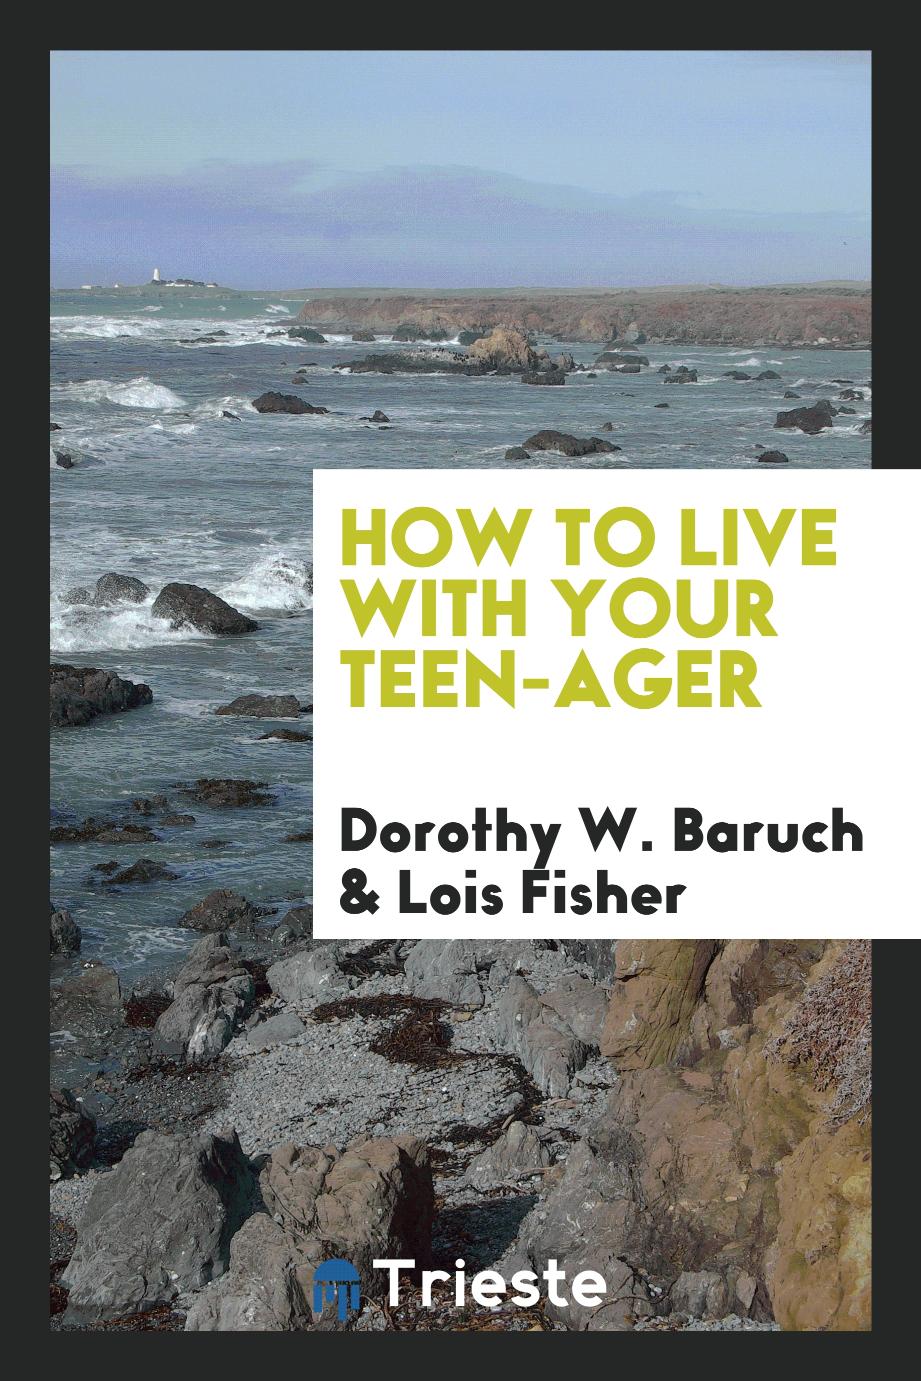 How to live with your teen-ager